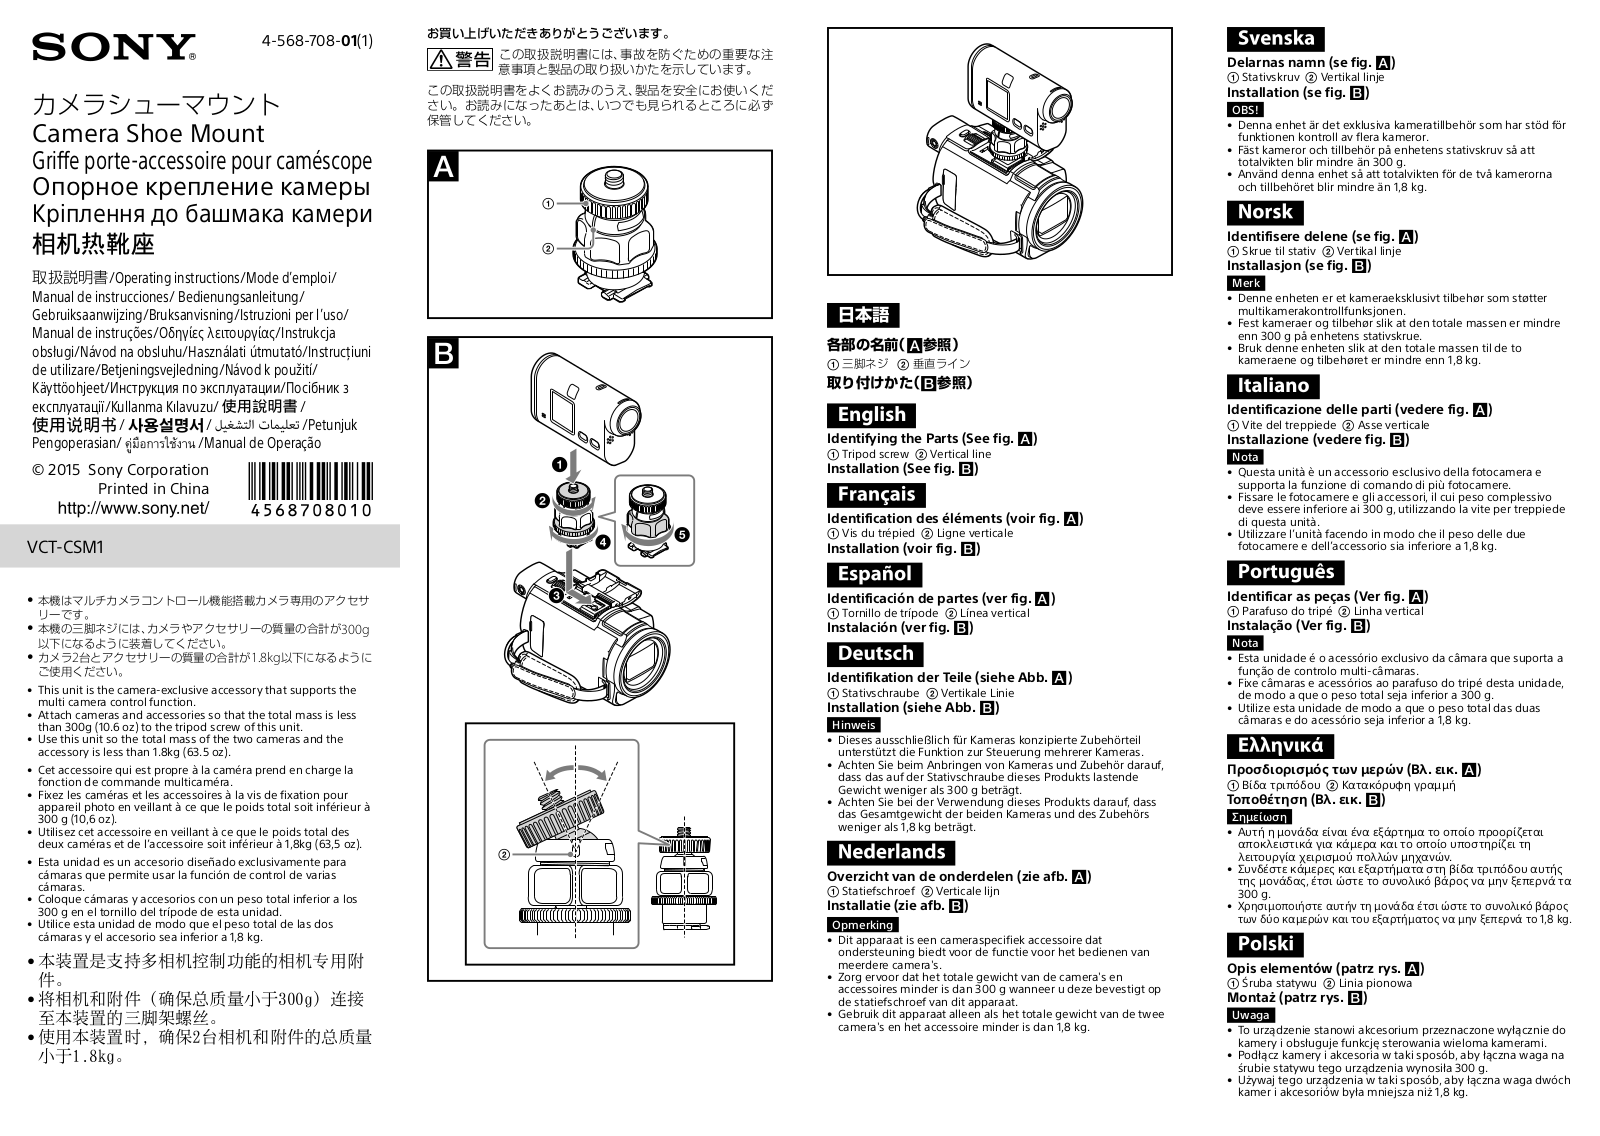 Sony VCT-CSM1 User Manual